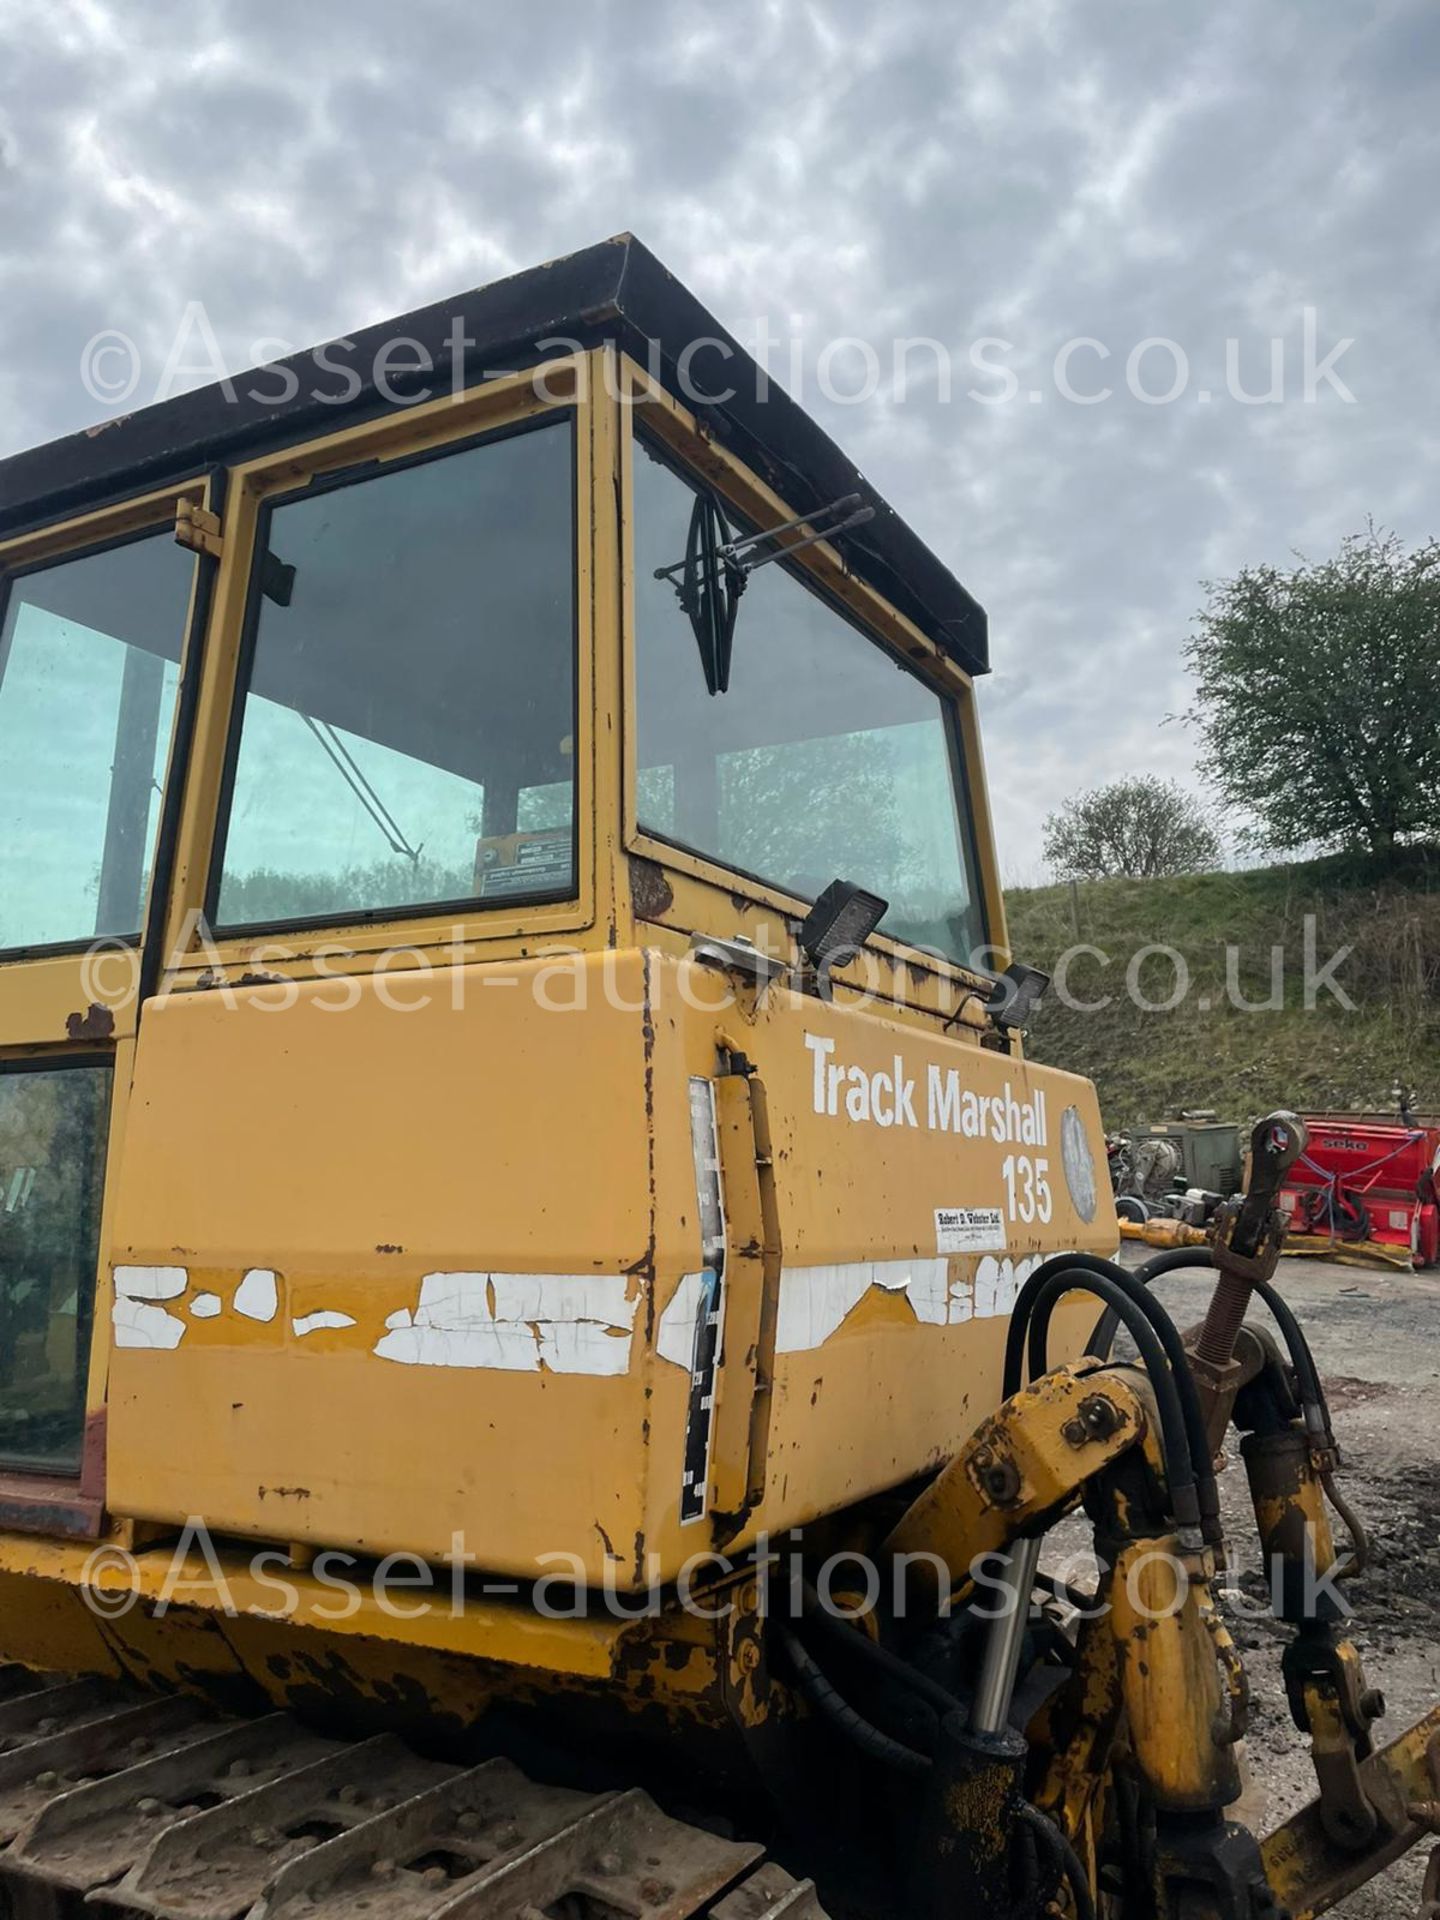 REAR TRACK MARSHALL 135 DOZER DROT, 584 RECORDED HOURS, REAR ARMS WITH 3 POINT LINKAGE *PLUS VAT* - Image 9 of 14